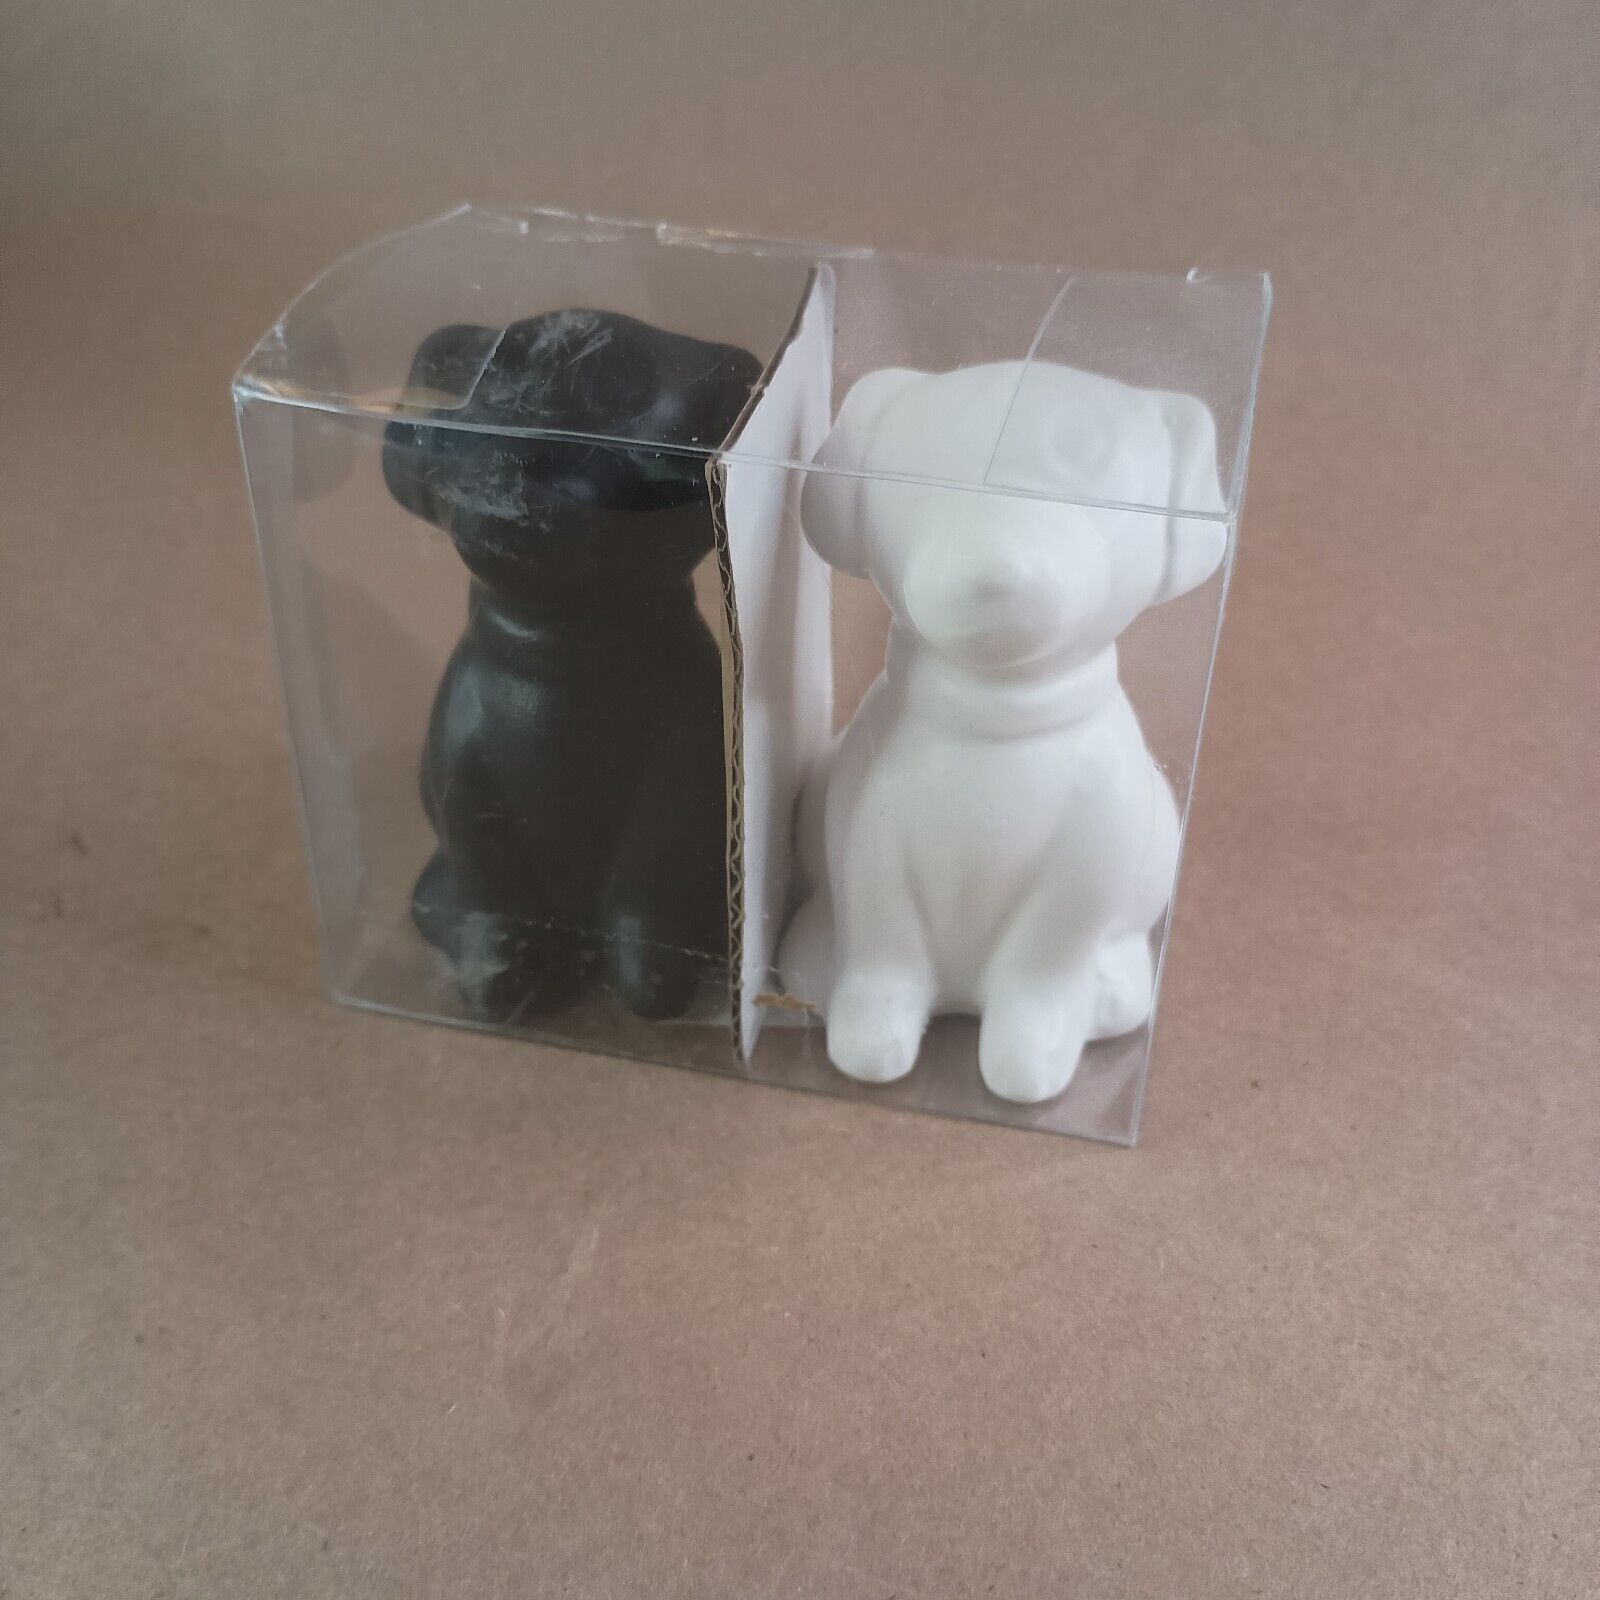 Vintage Black and White Dog Salt and Pepper Shakers NIB Cute